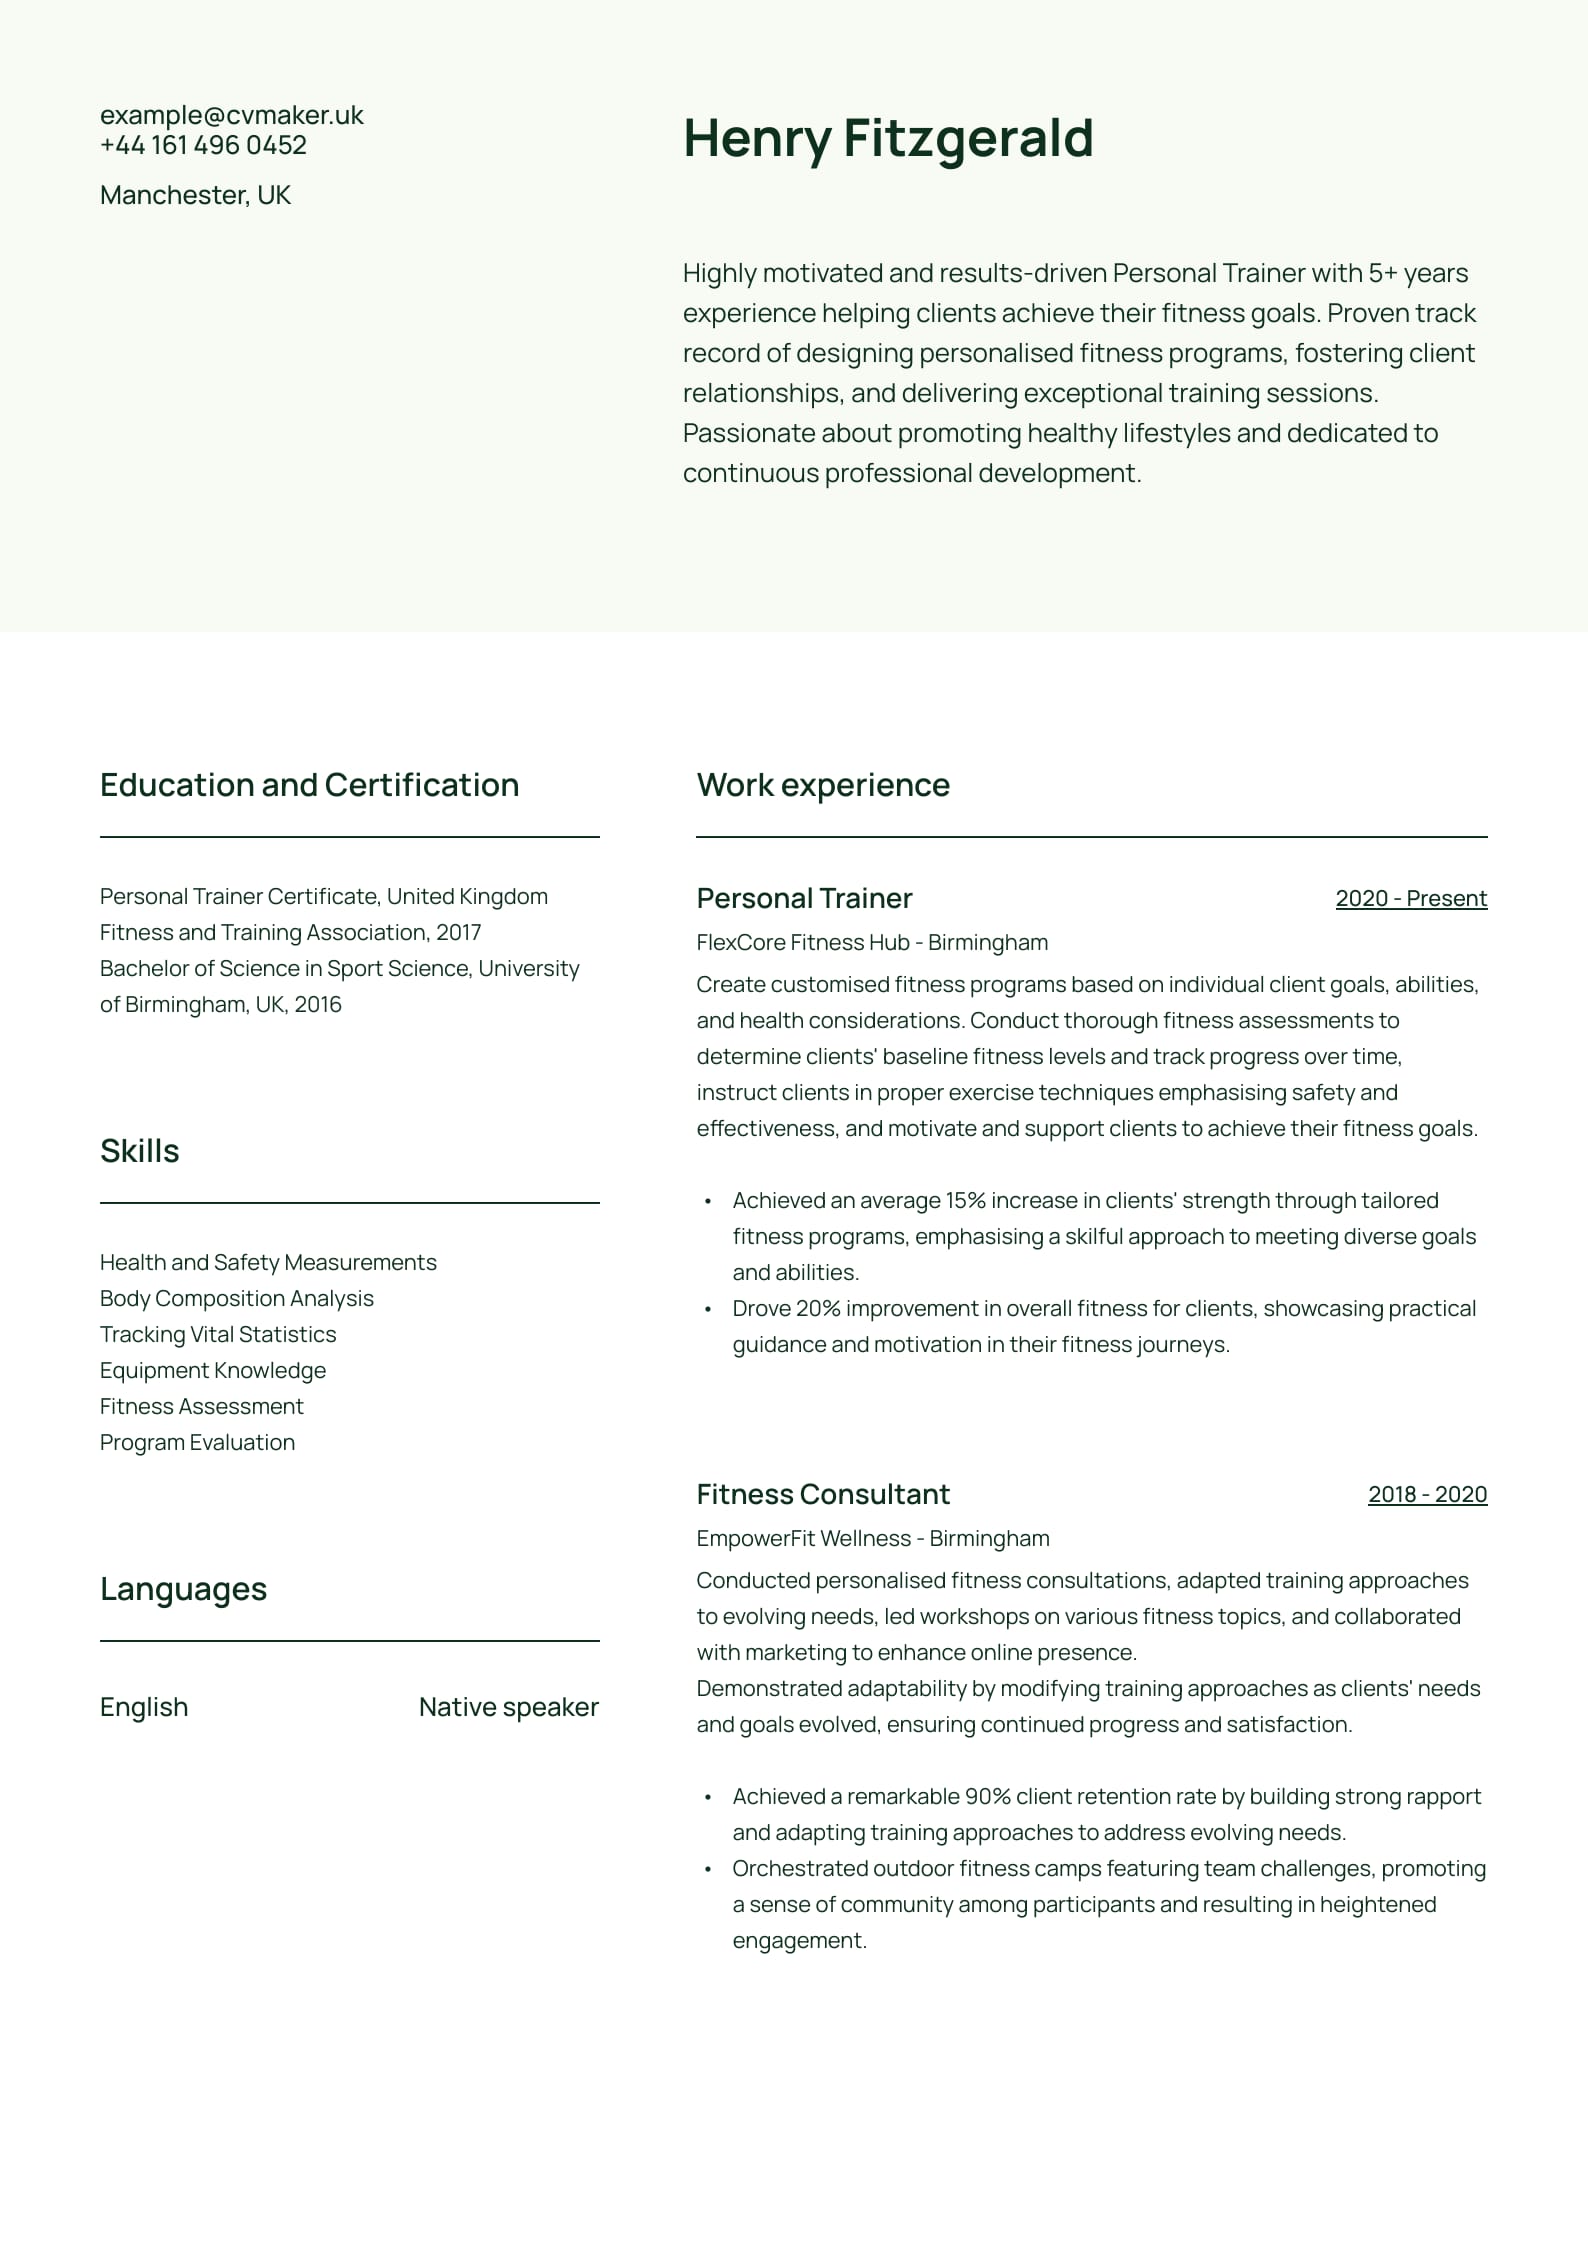 Personal trainer CV example